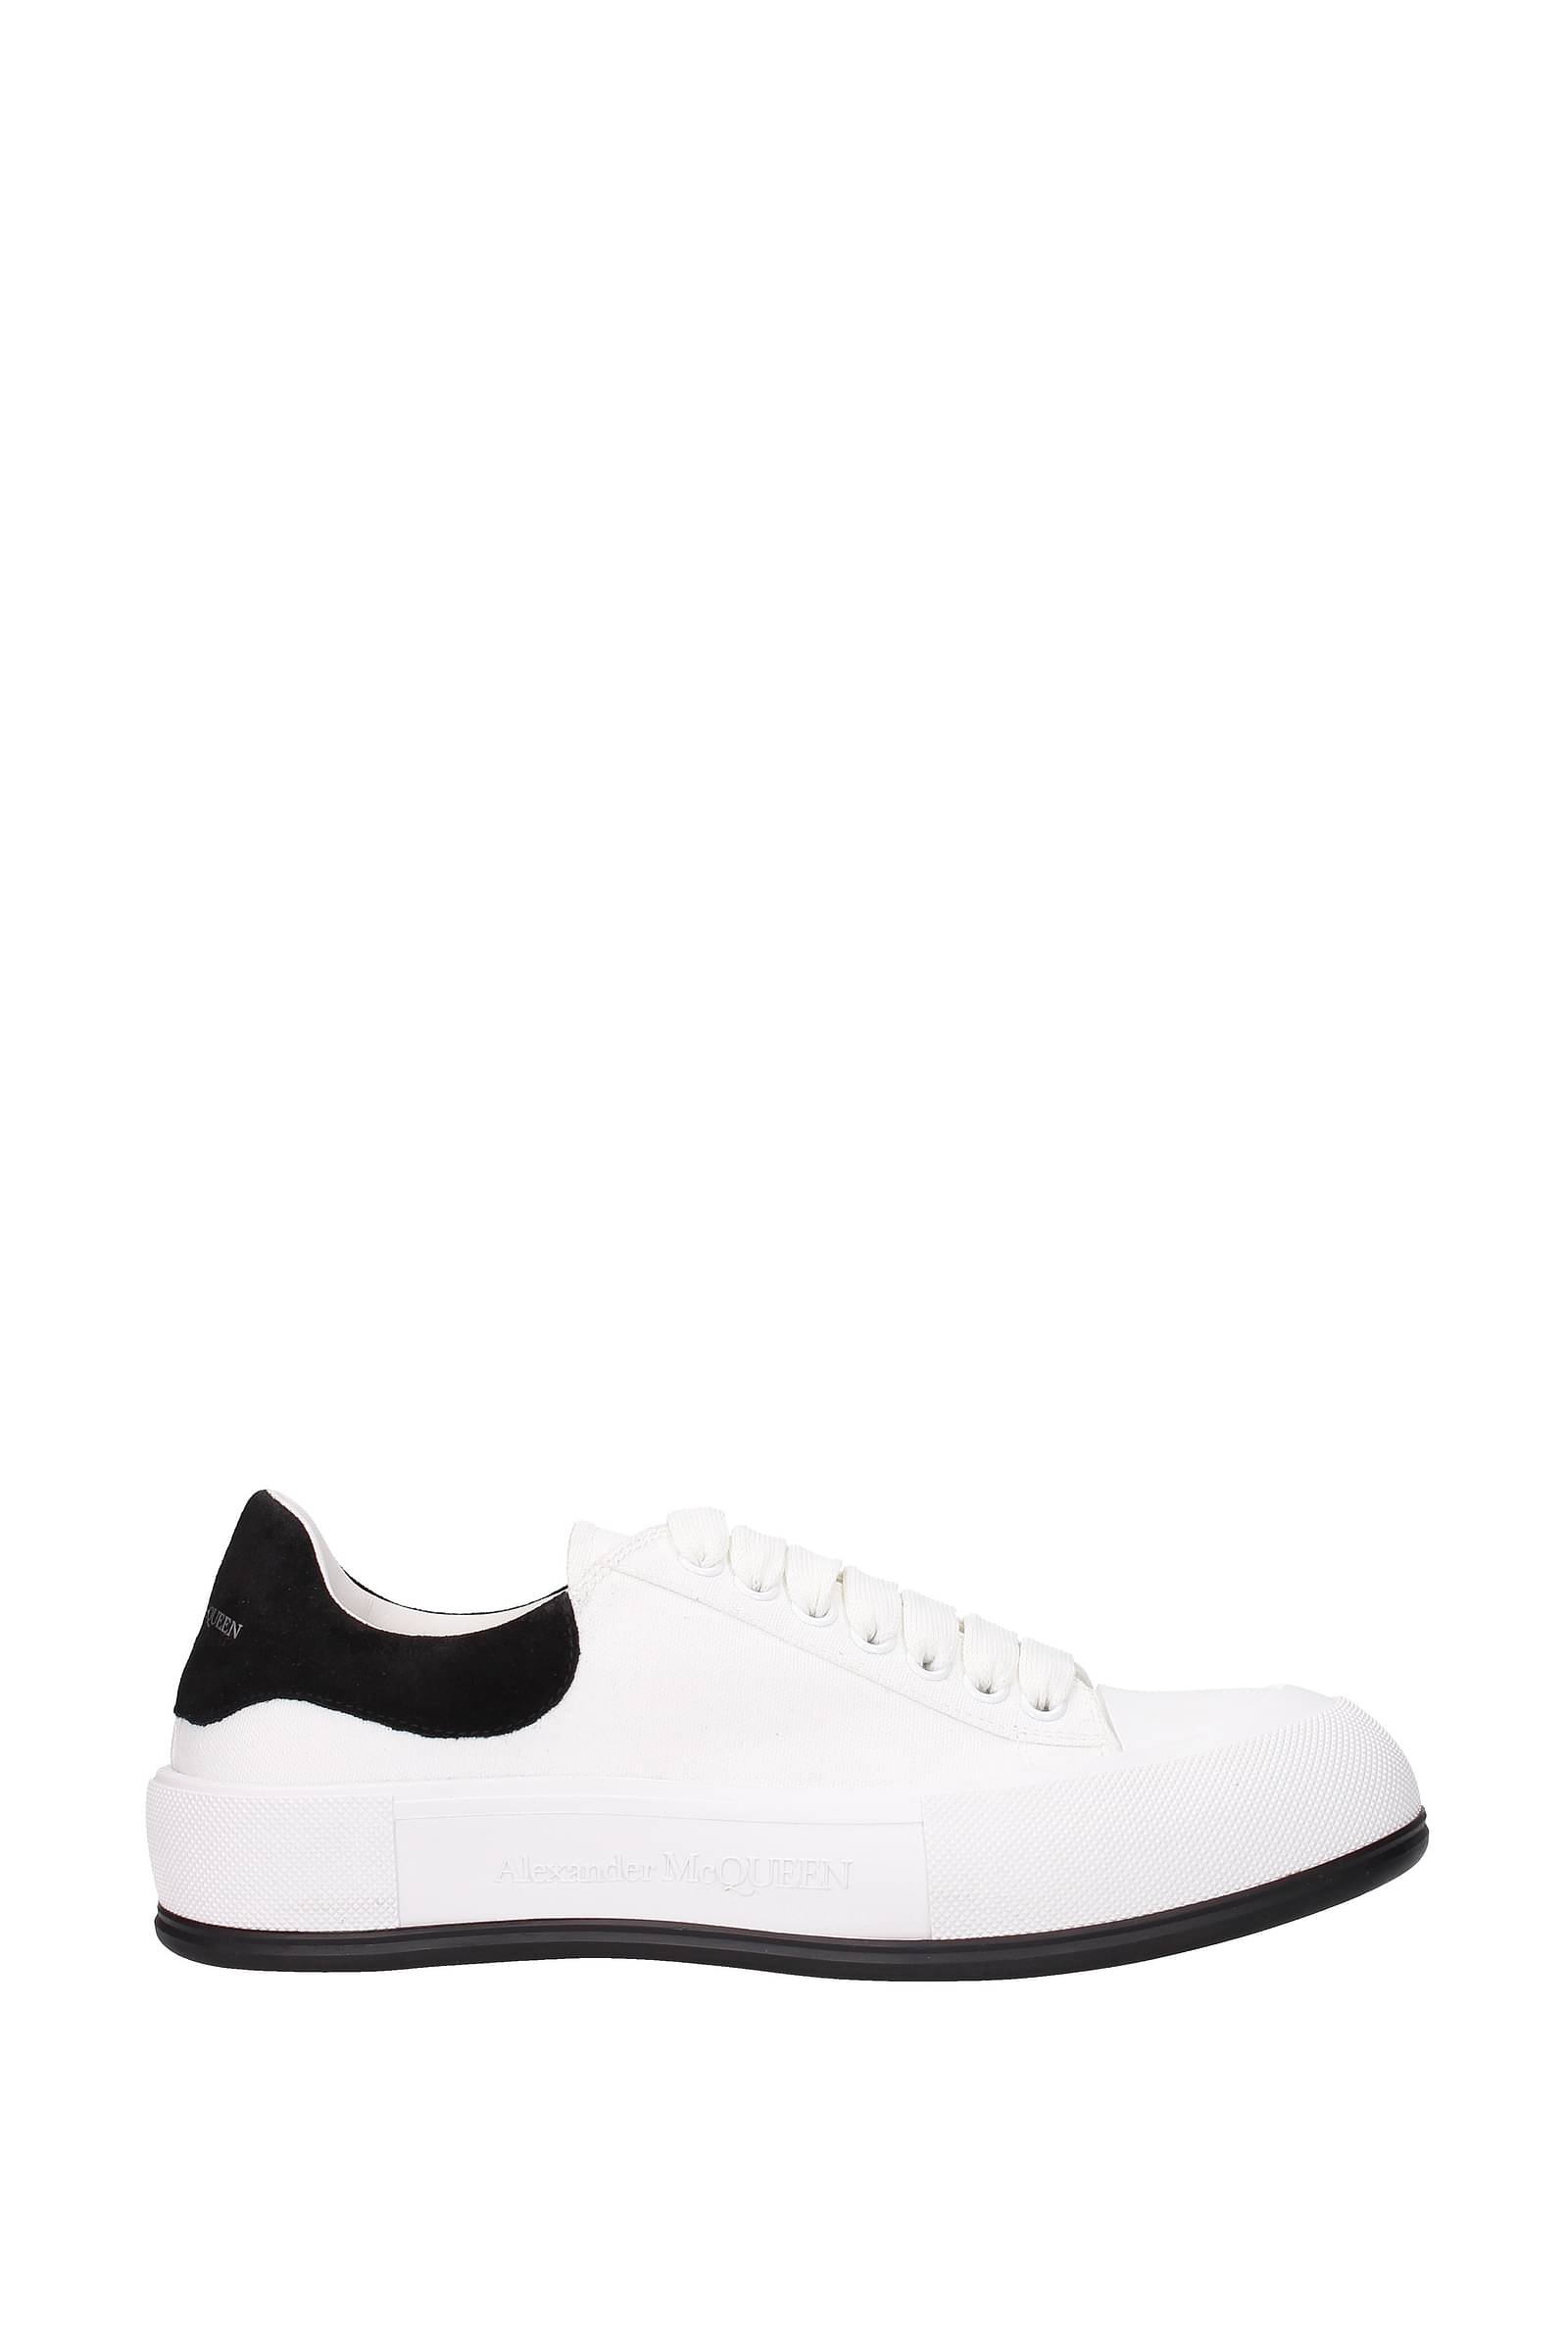 black and white alexander mcqueen sneakers mens